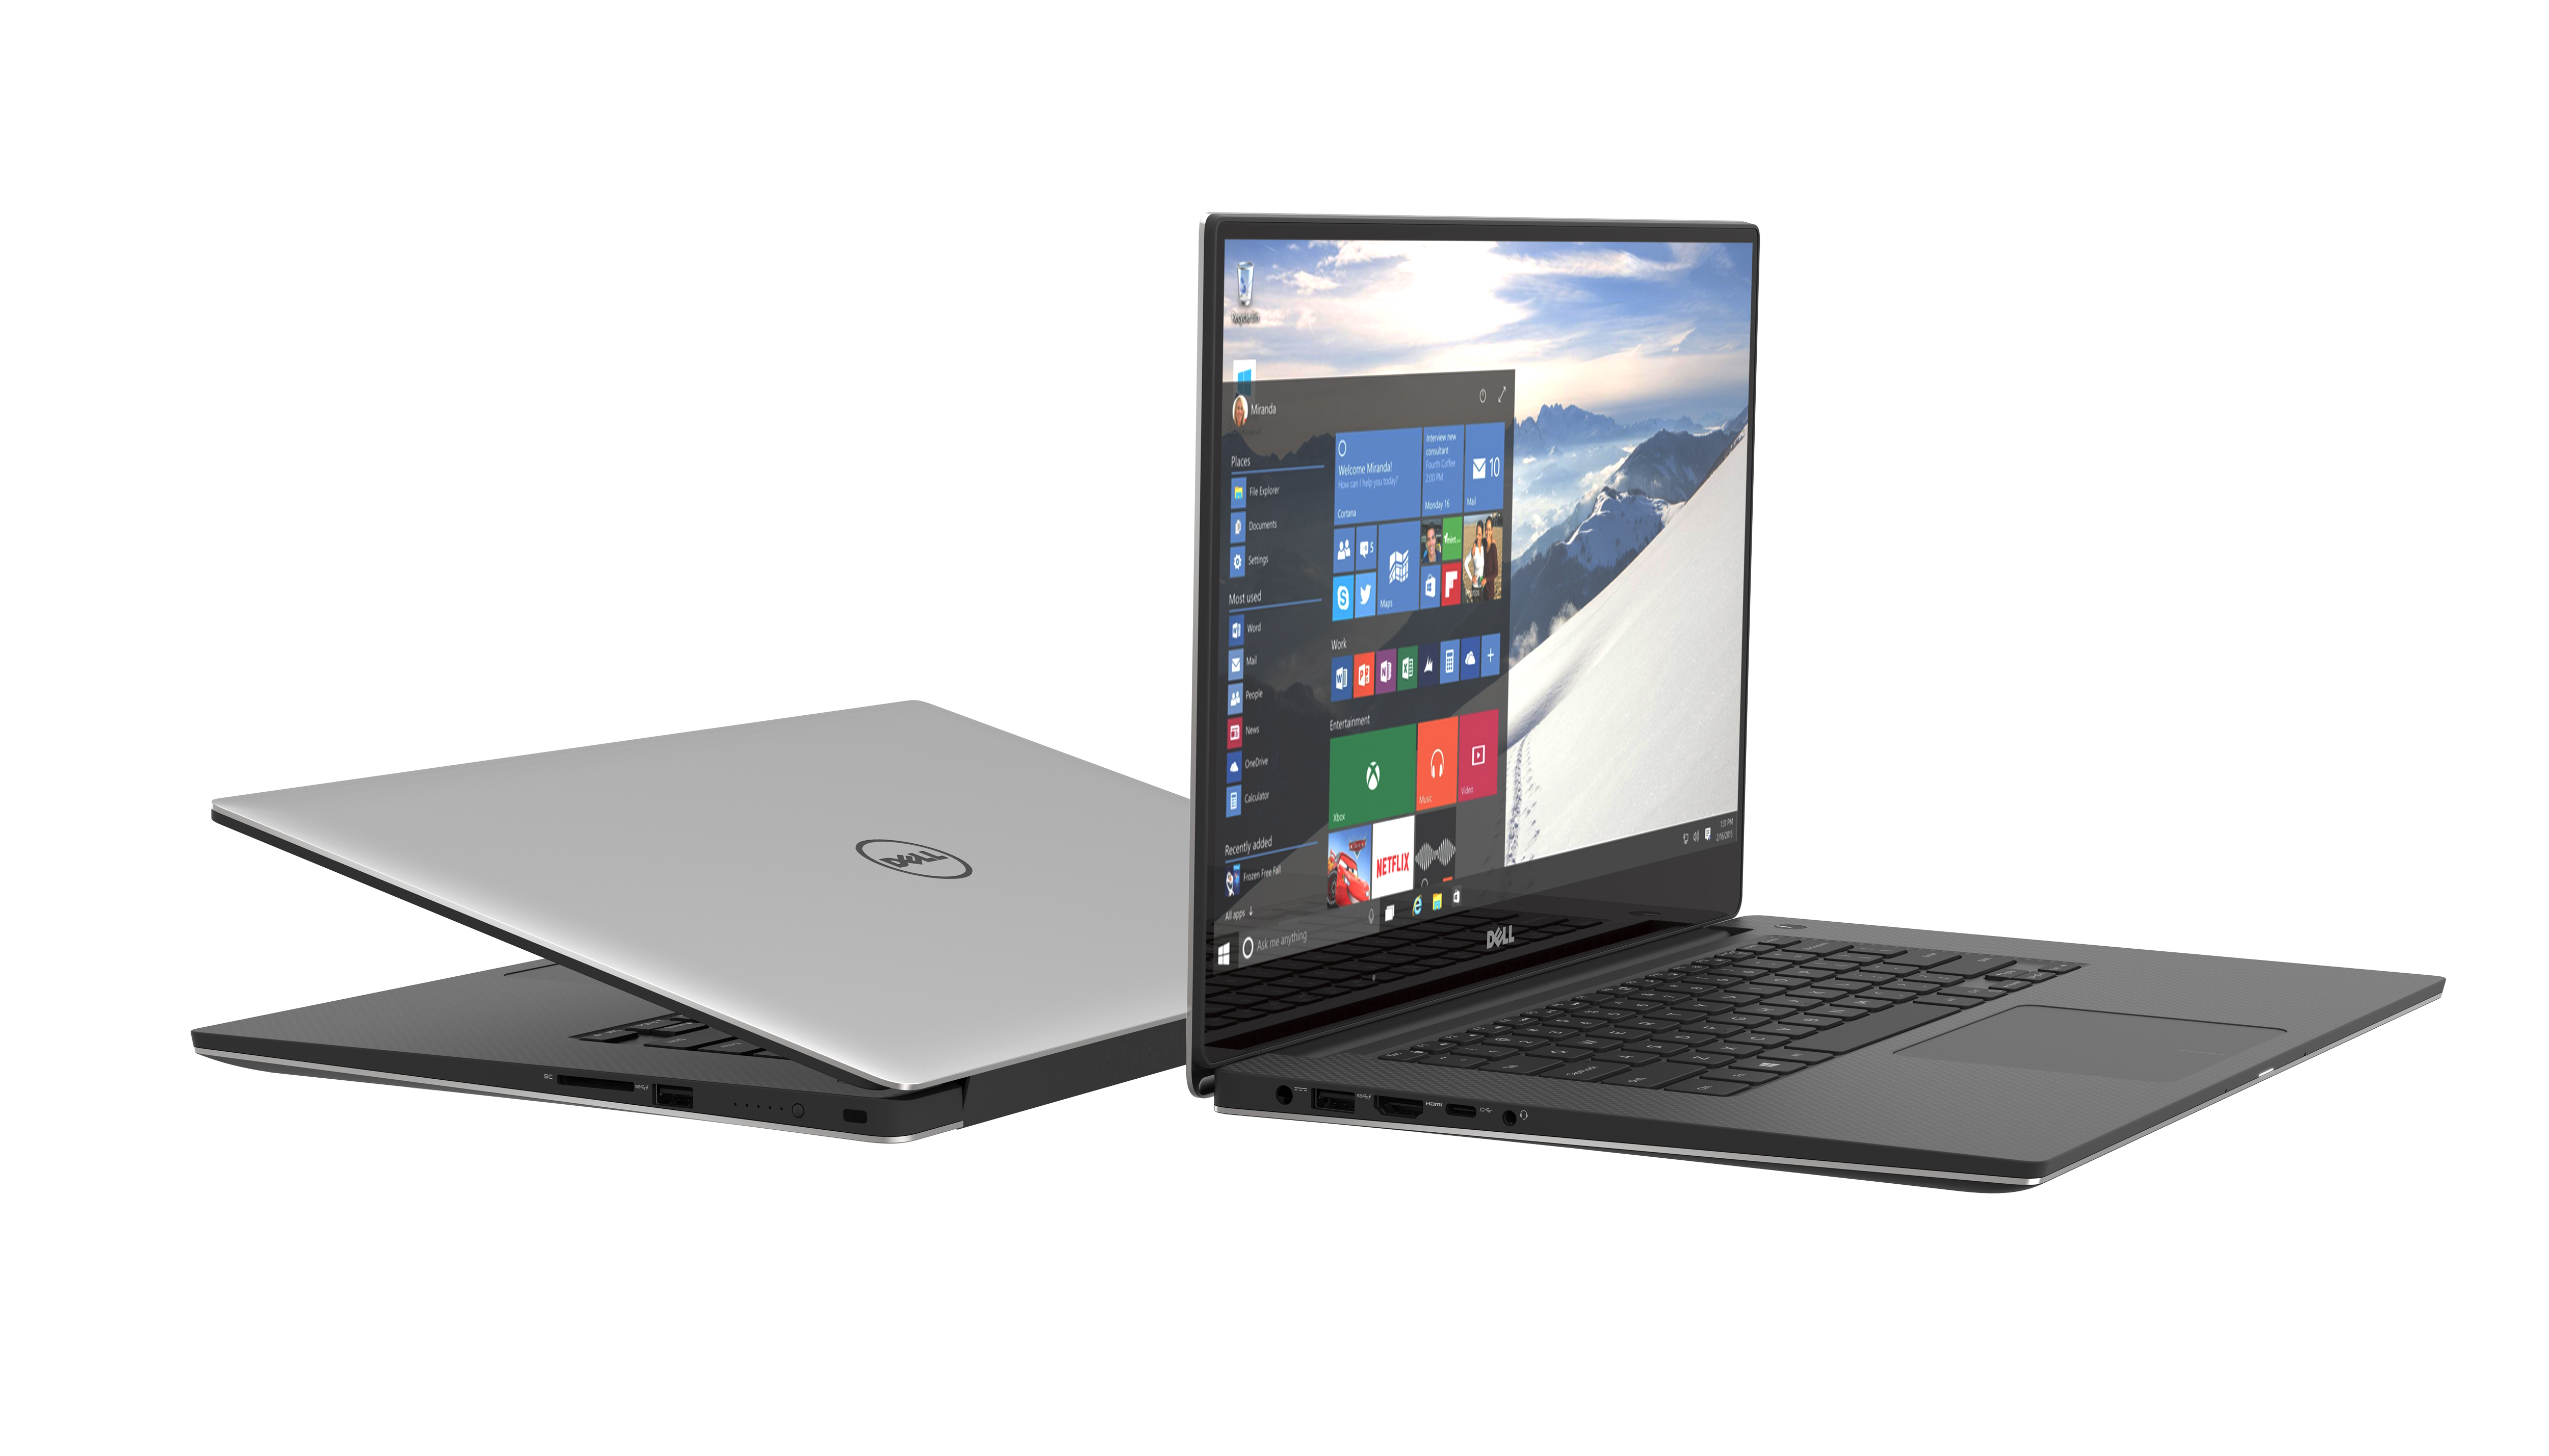 Dell XPS 15 powered by Windows 10.